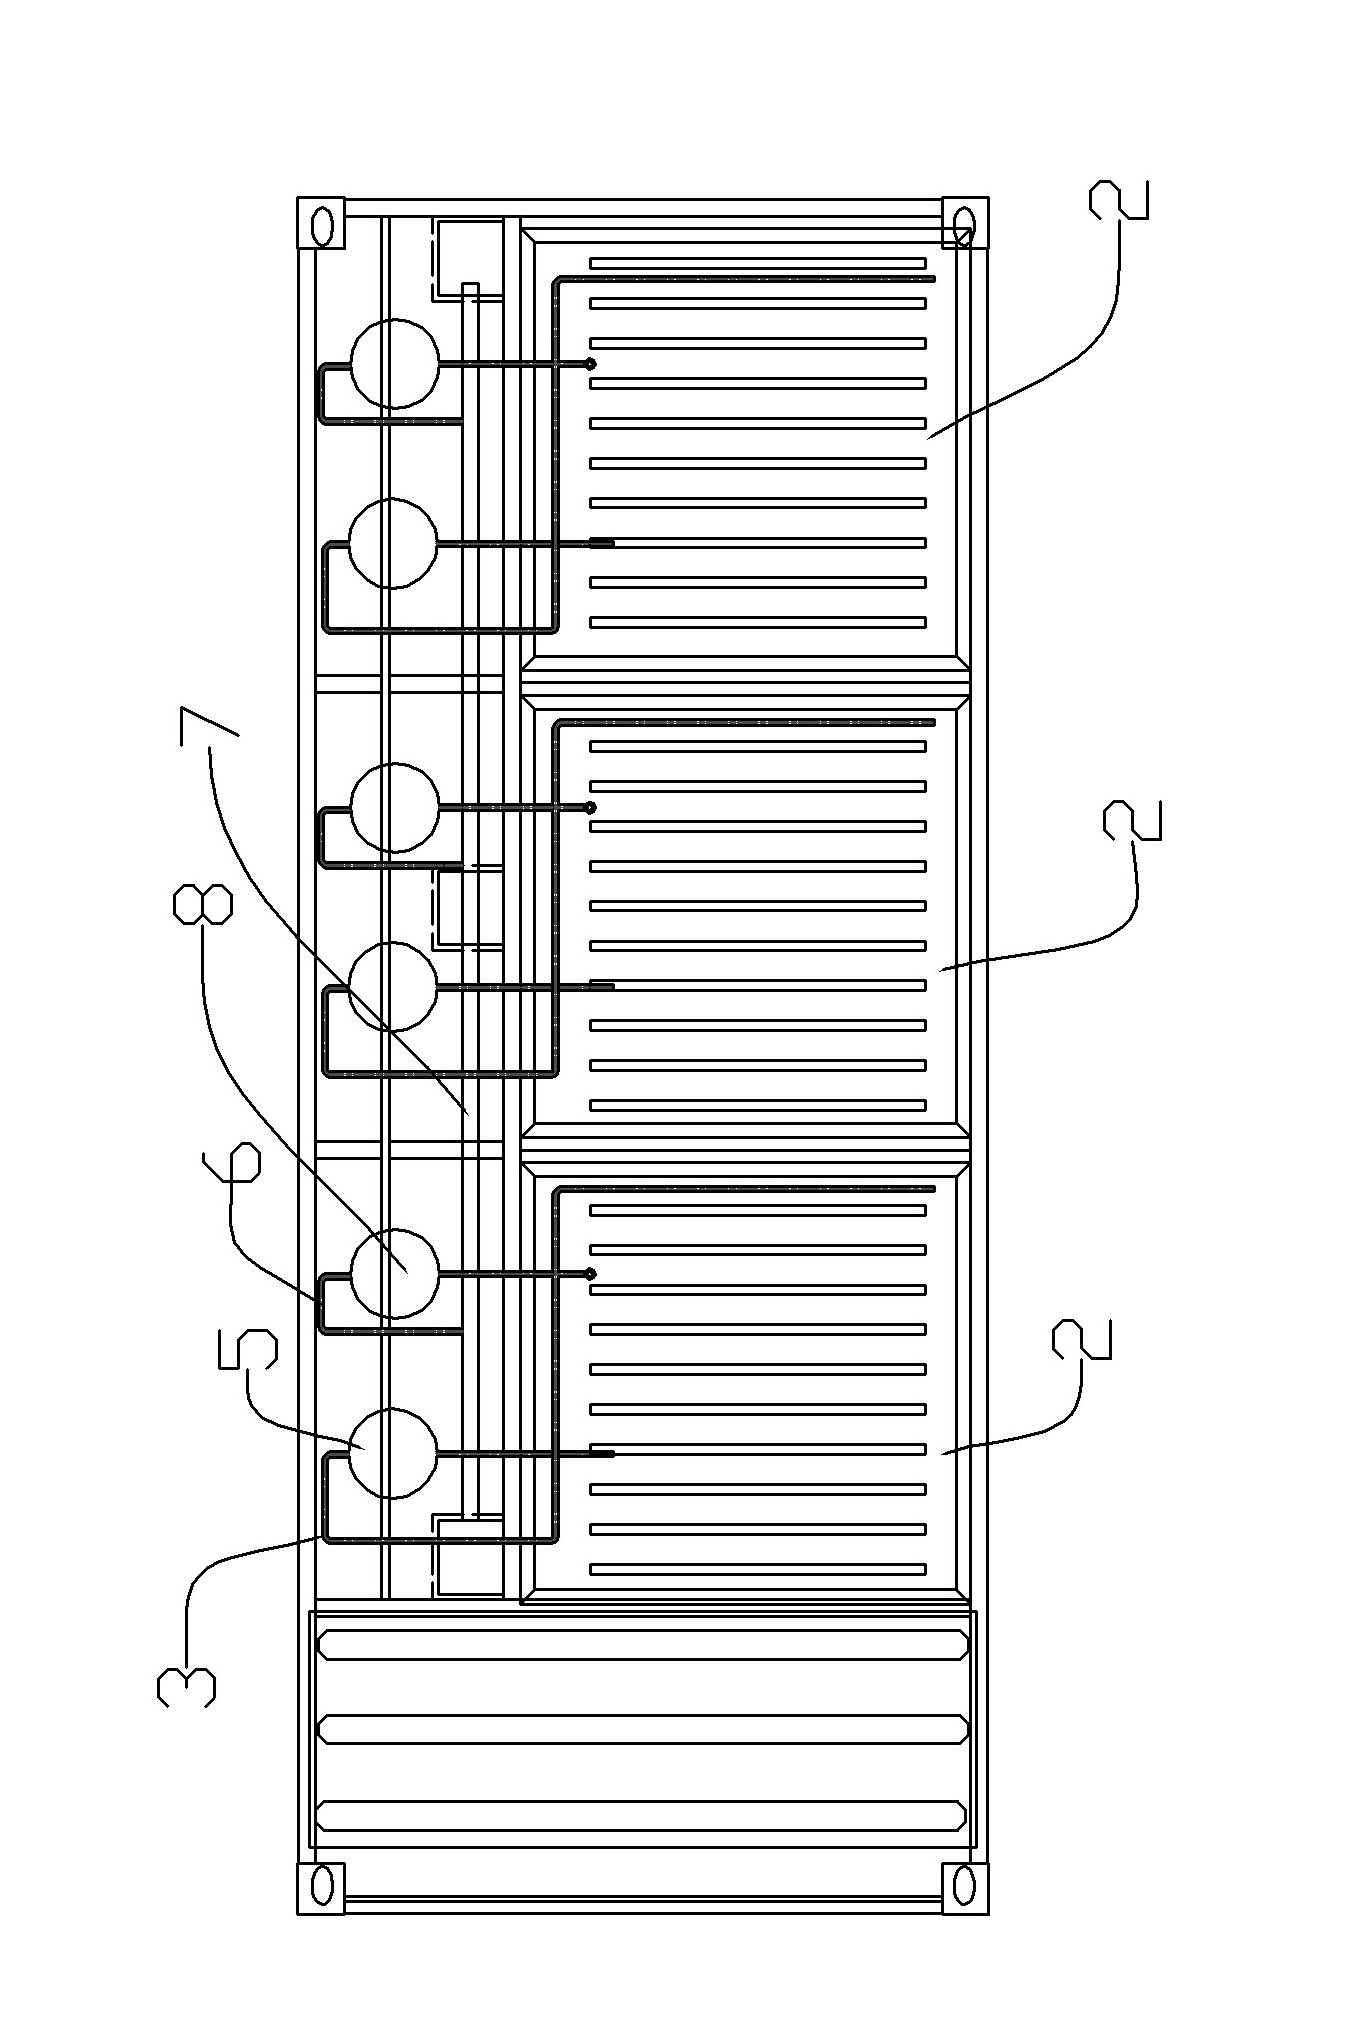 Water resistor for load test in generator and generator load testing device